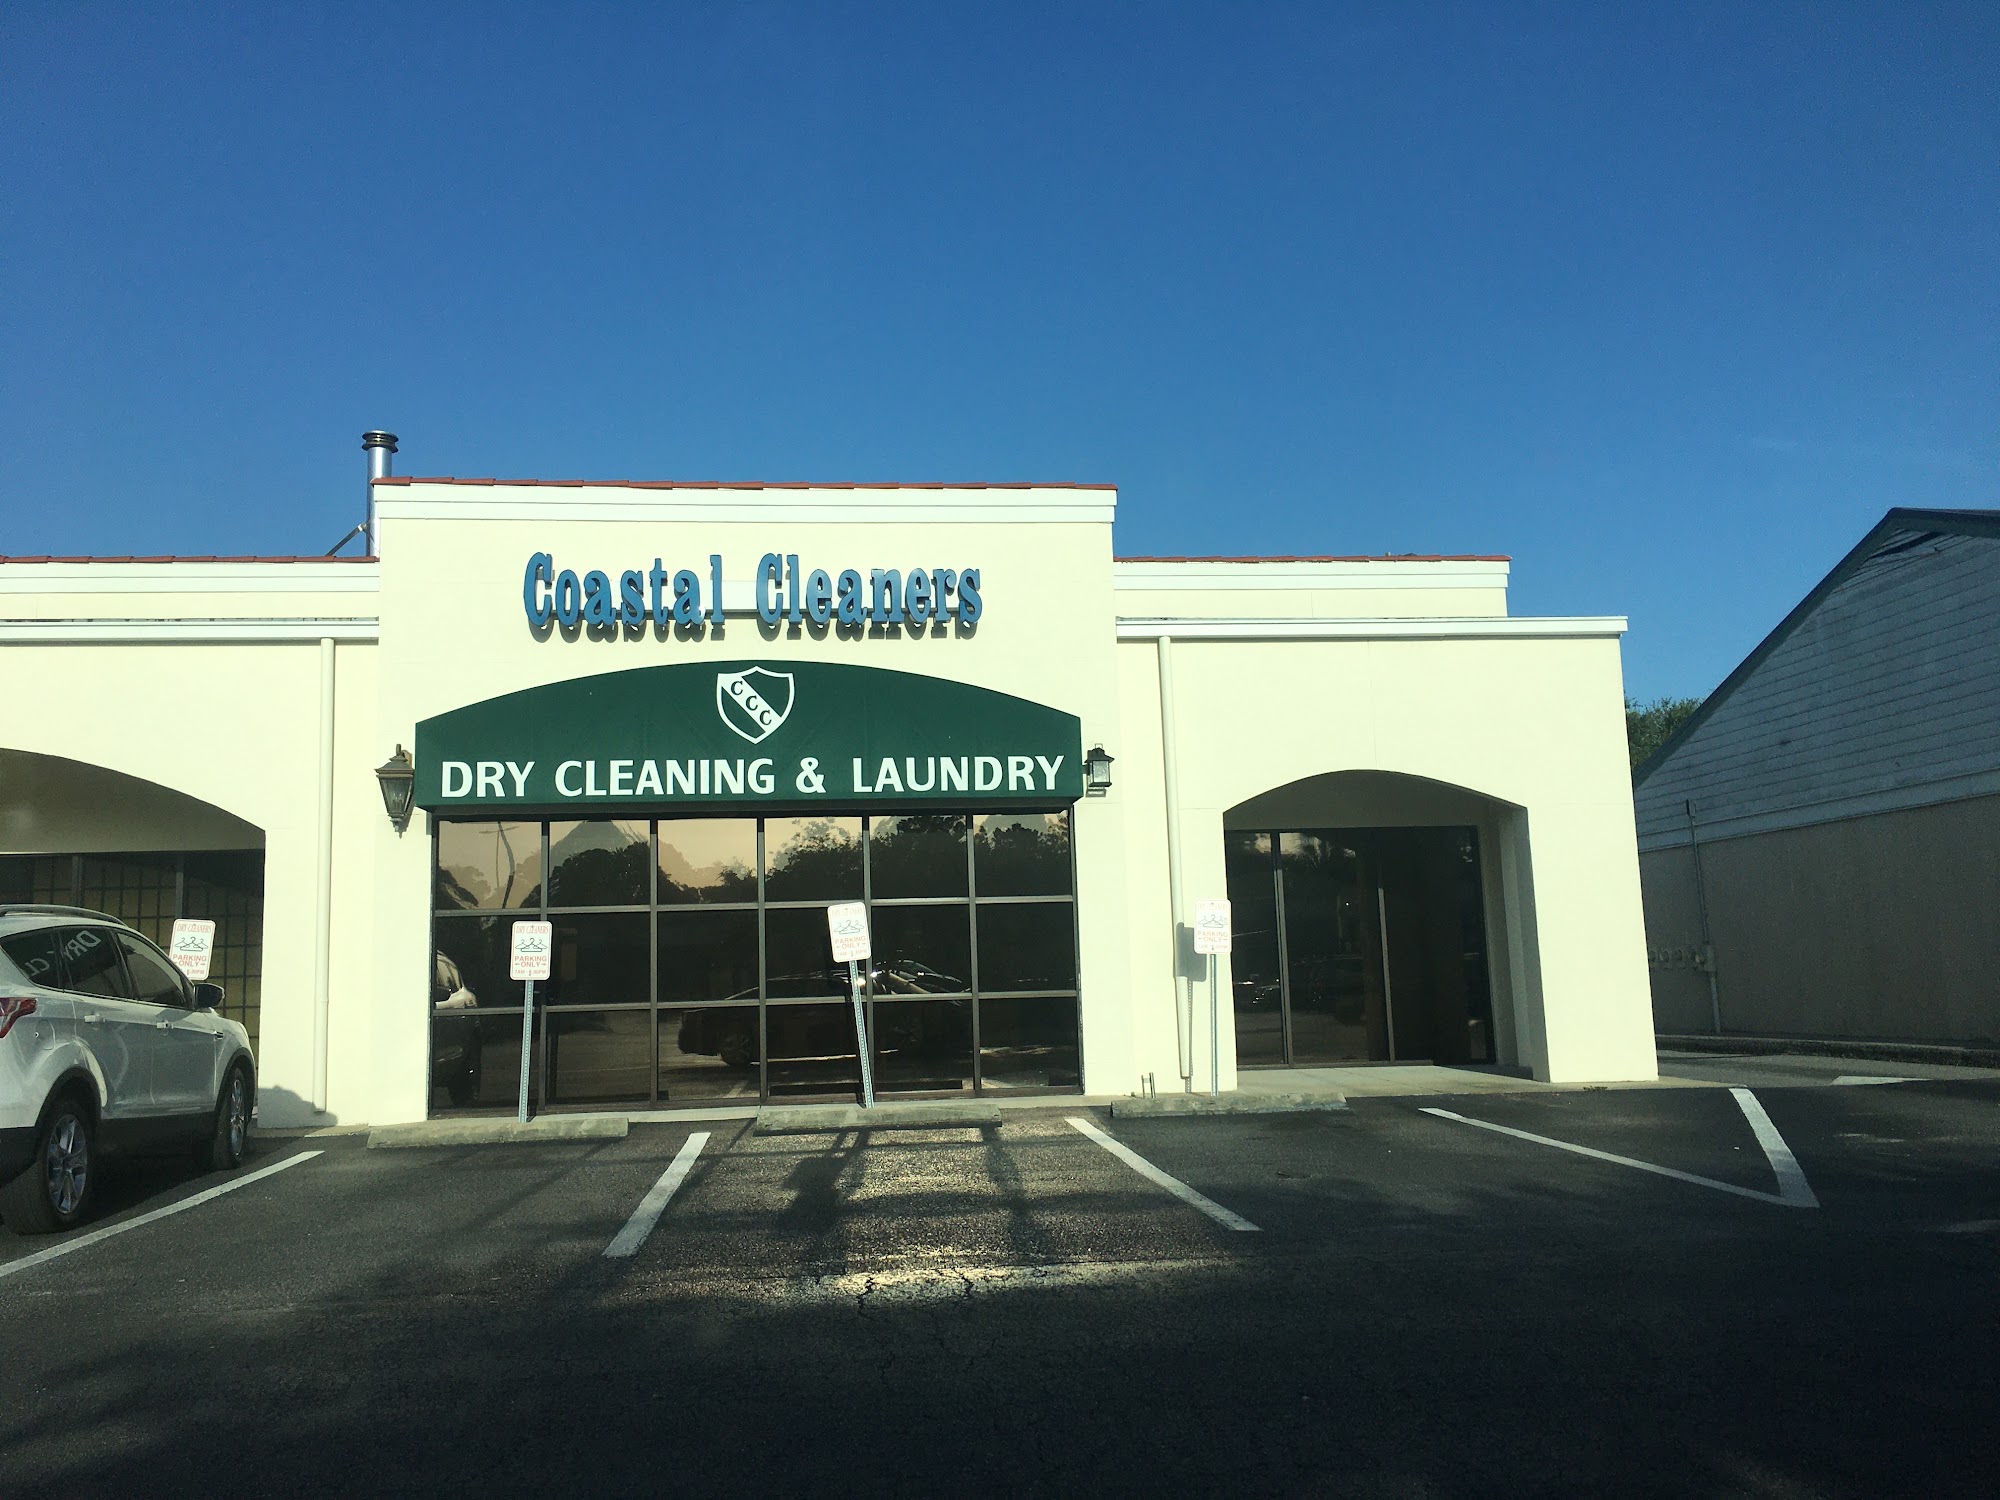 Cannon's Coastal Cleaners